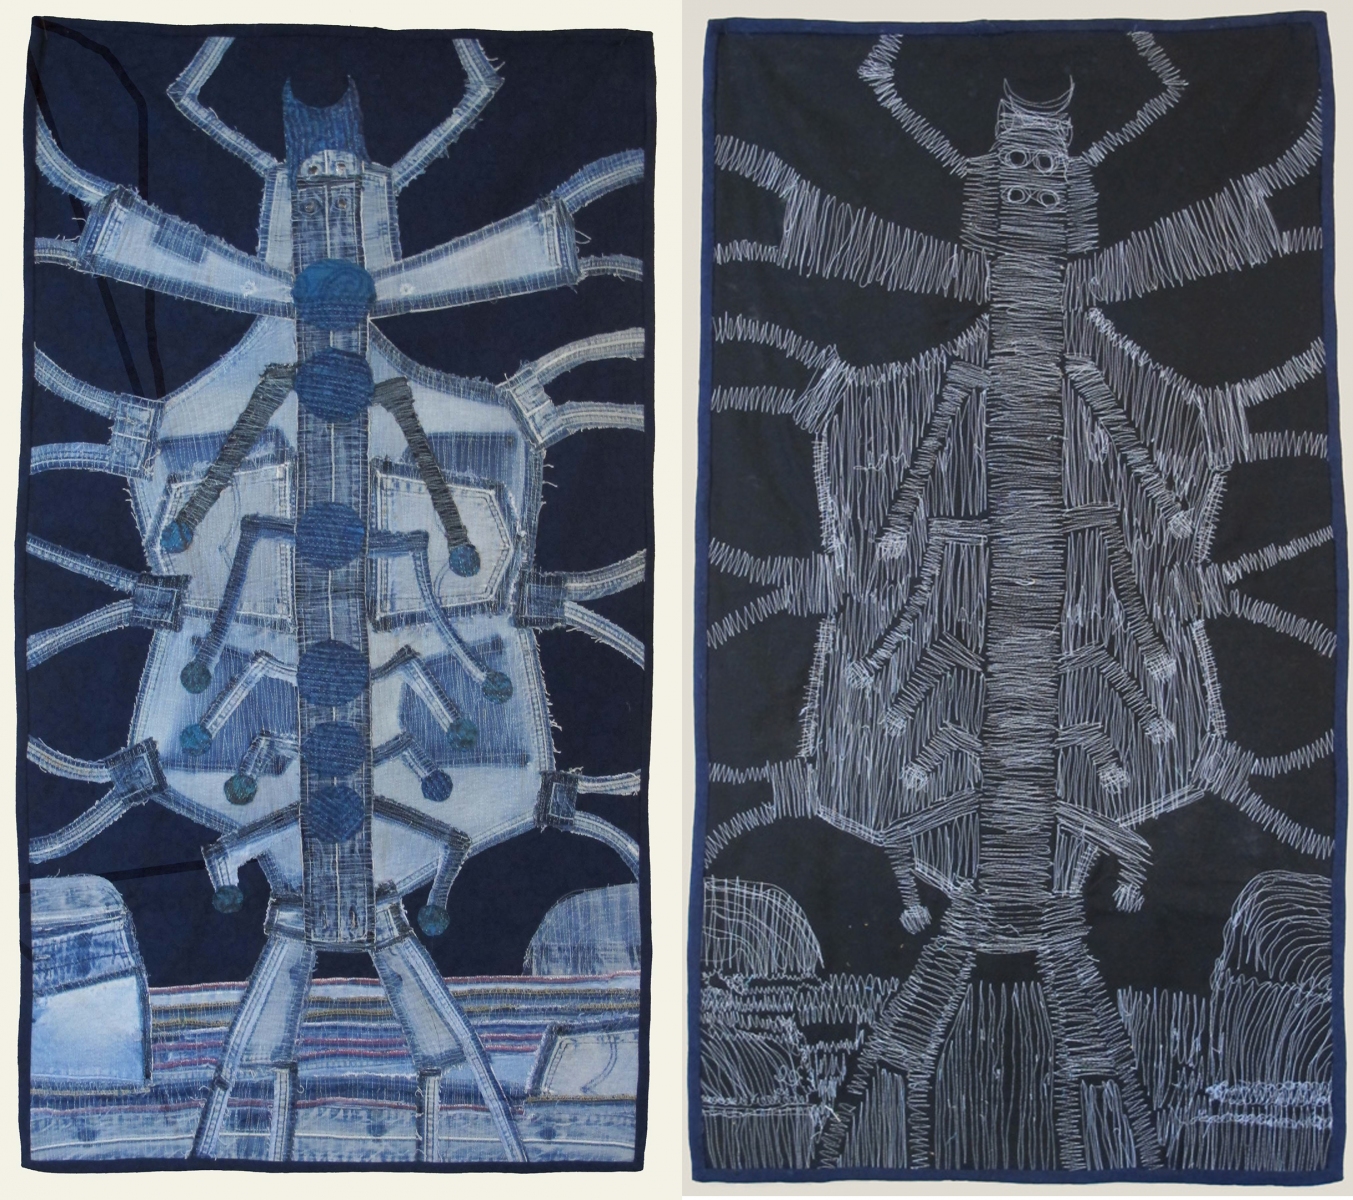 Pandemic # 3, Denim Mined Series. 2020, 31 ½” x 57”. Recycled denim and Indian fabrics, applique, machine stitched. Front/back. $2000